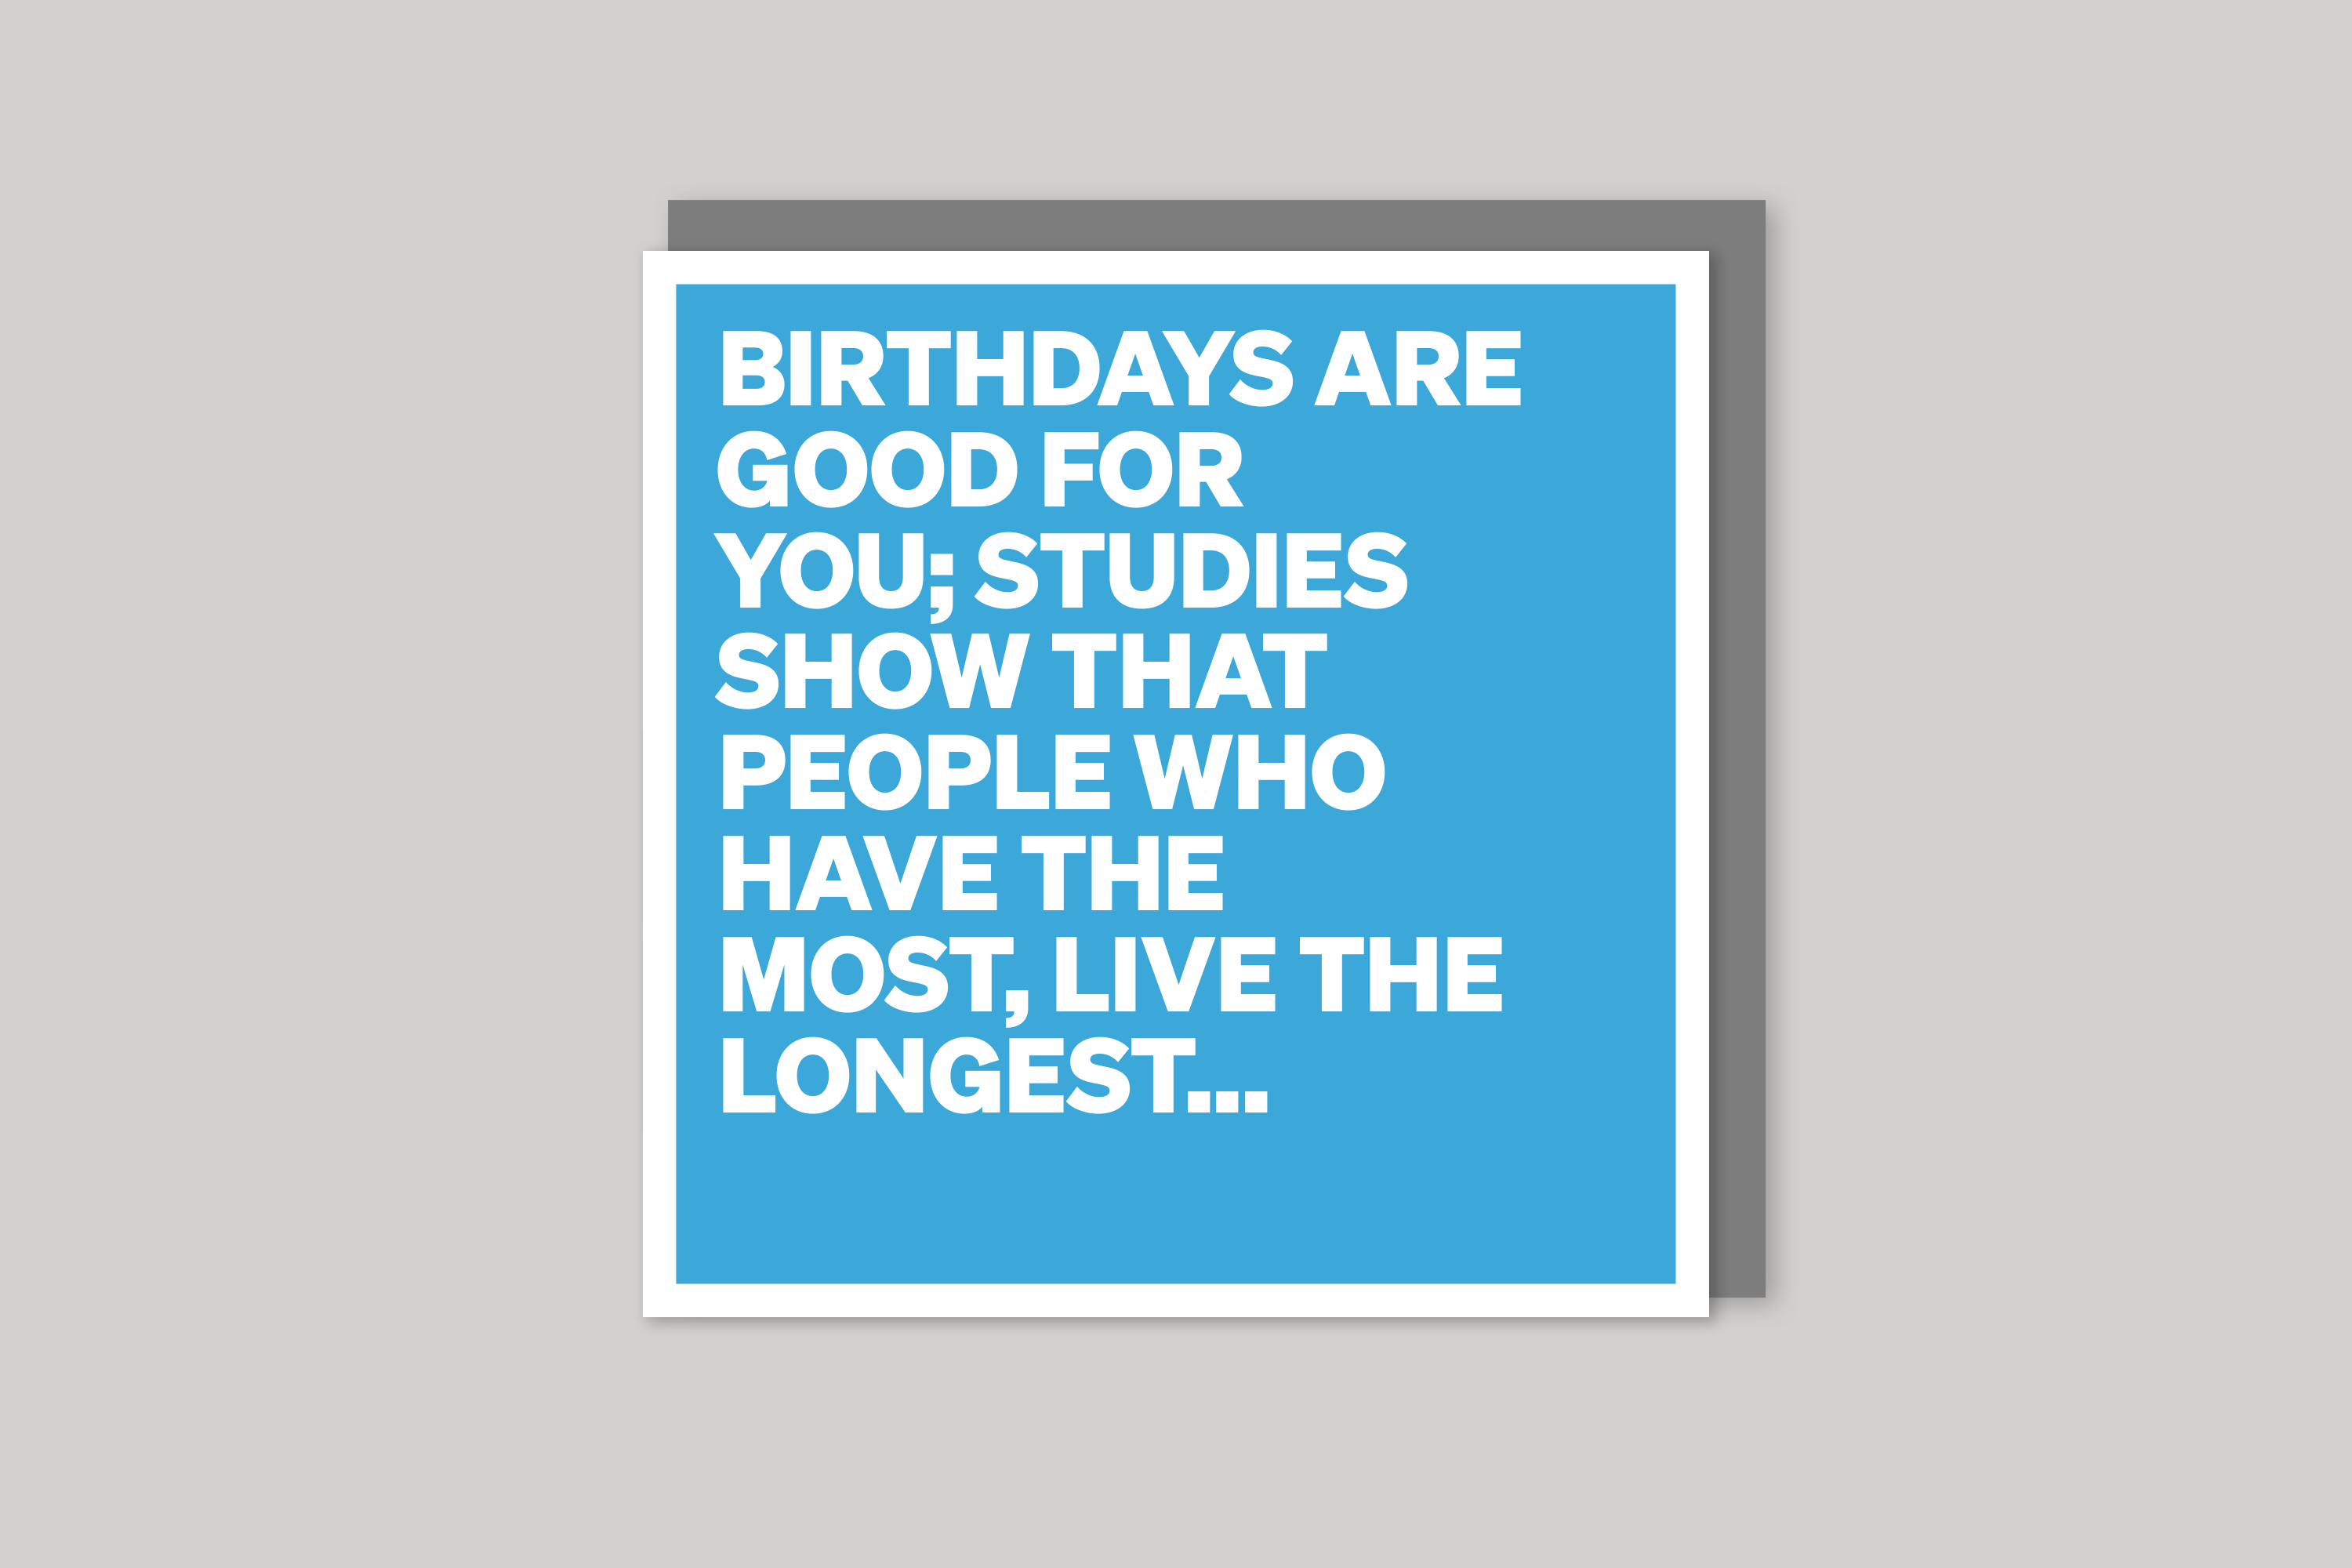 Studies Show…. from The Other Side range of quotation cards by Icon, back page.